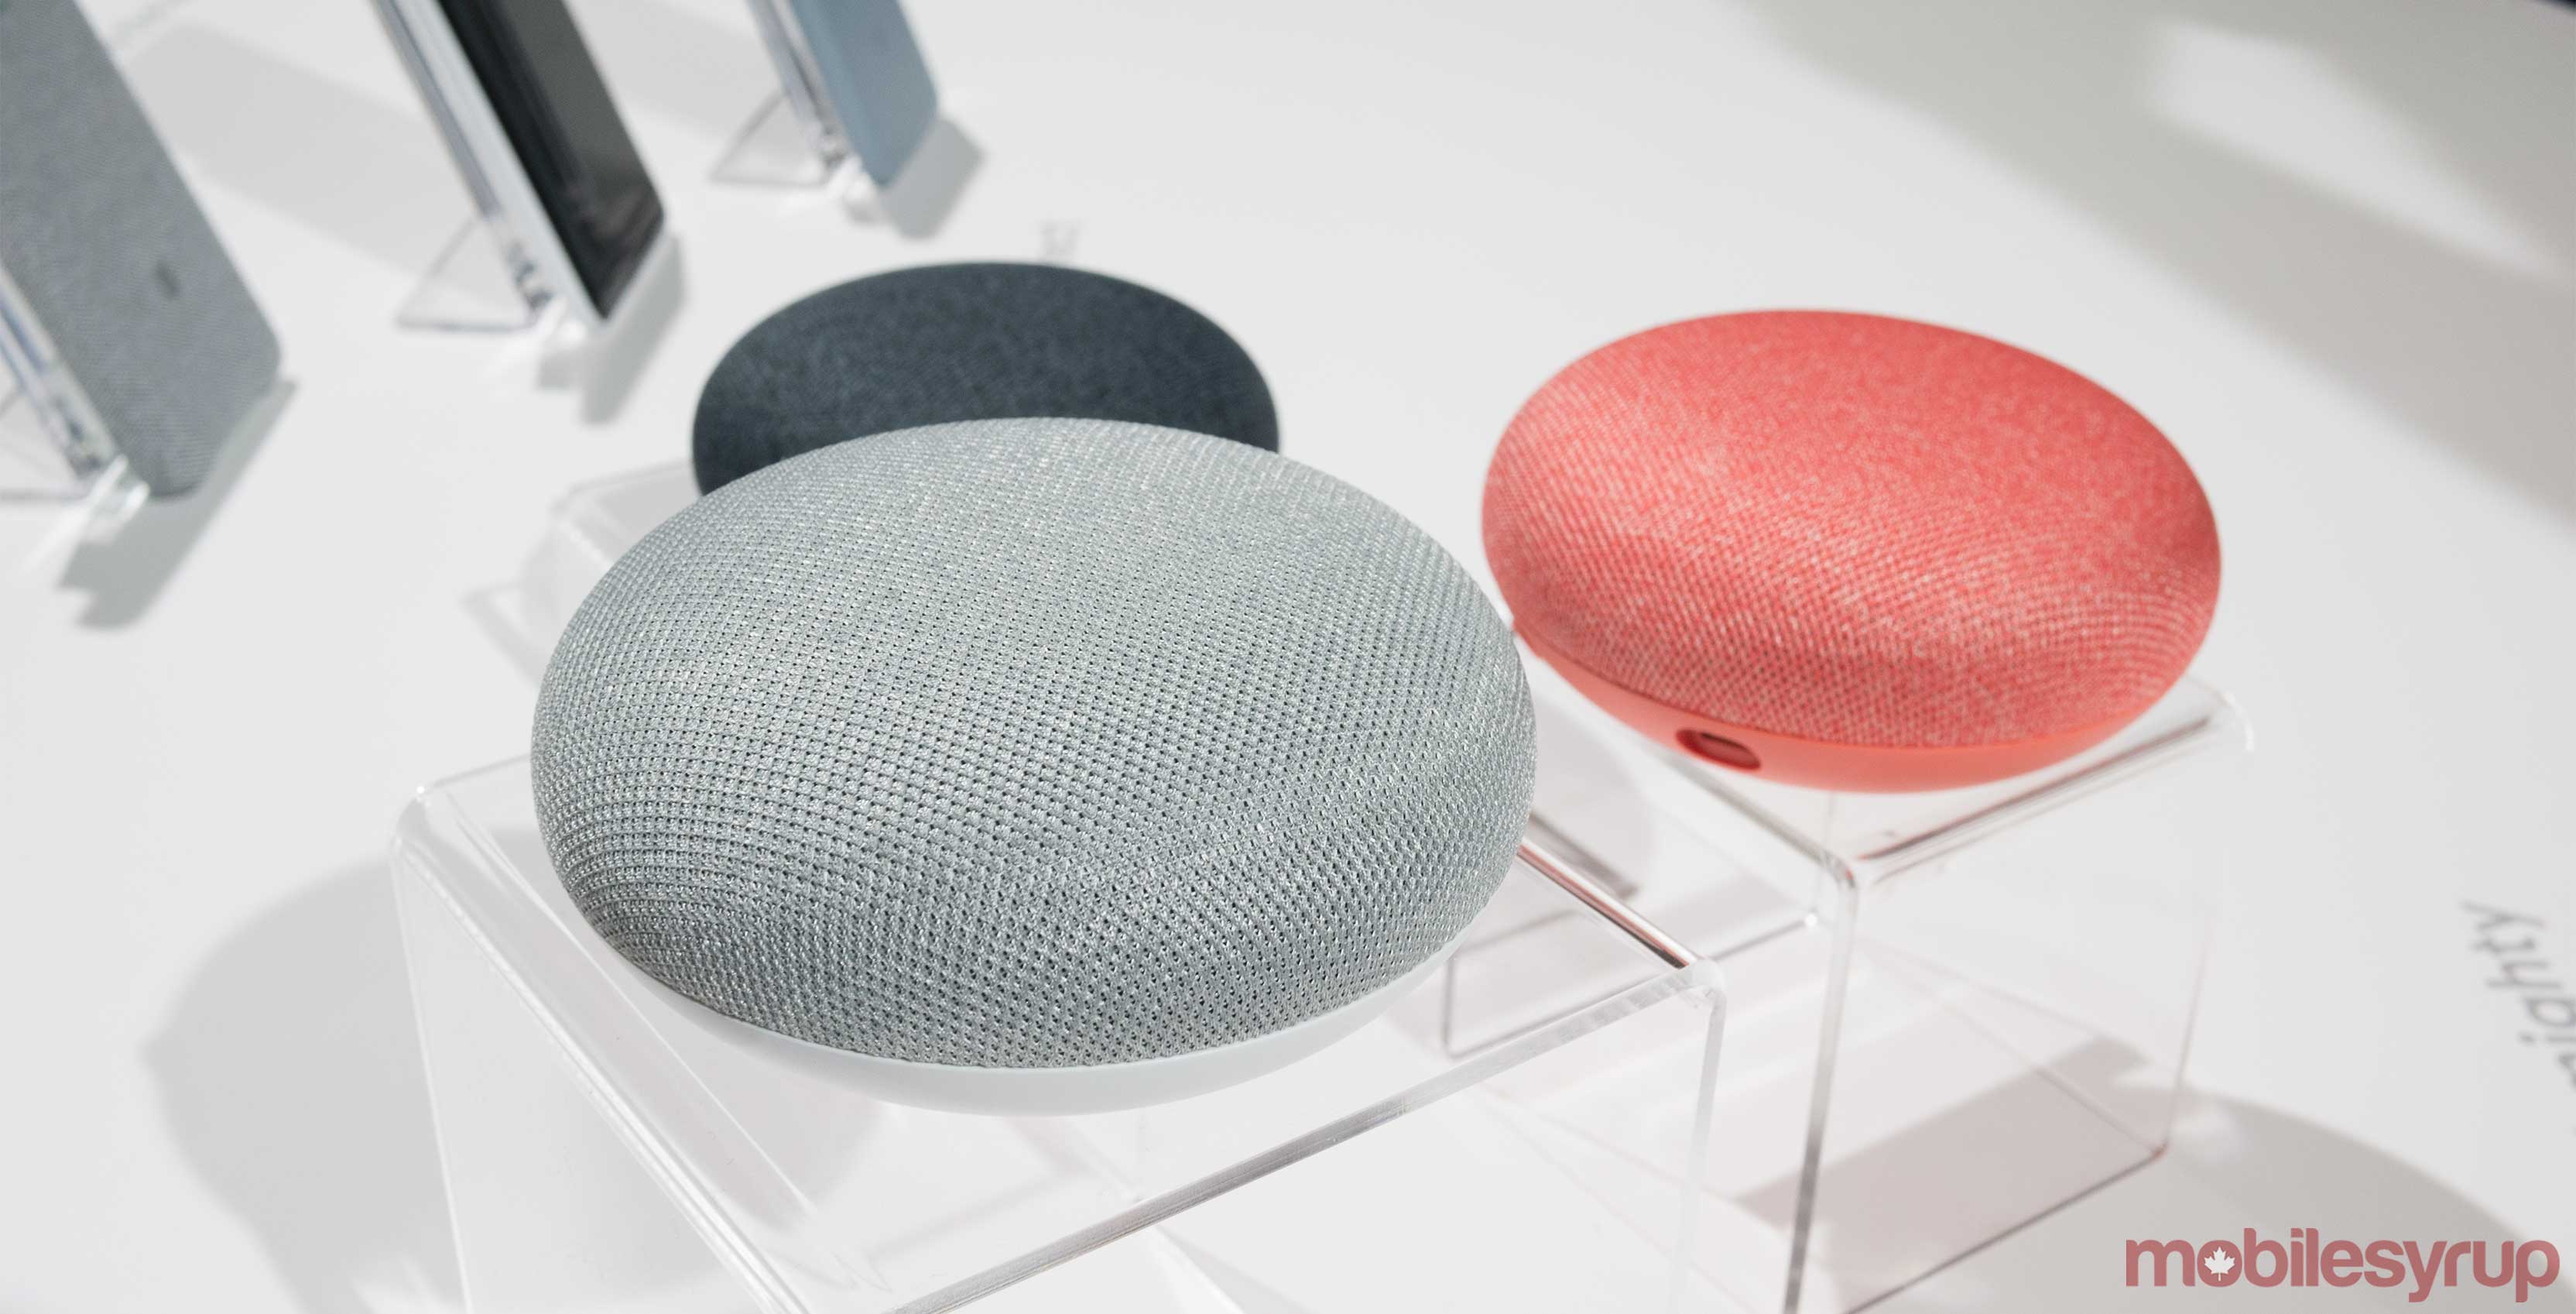 The three different colours of the Google Home Mini